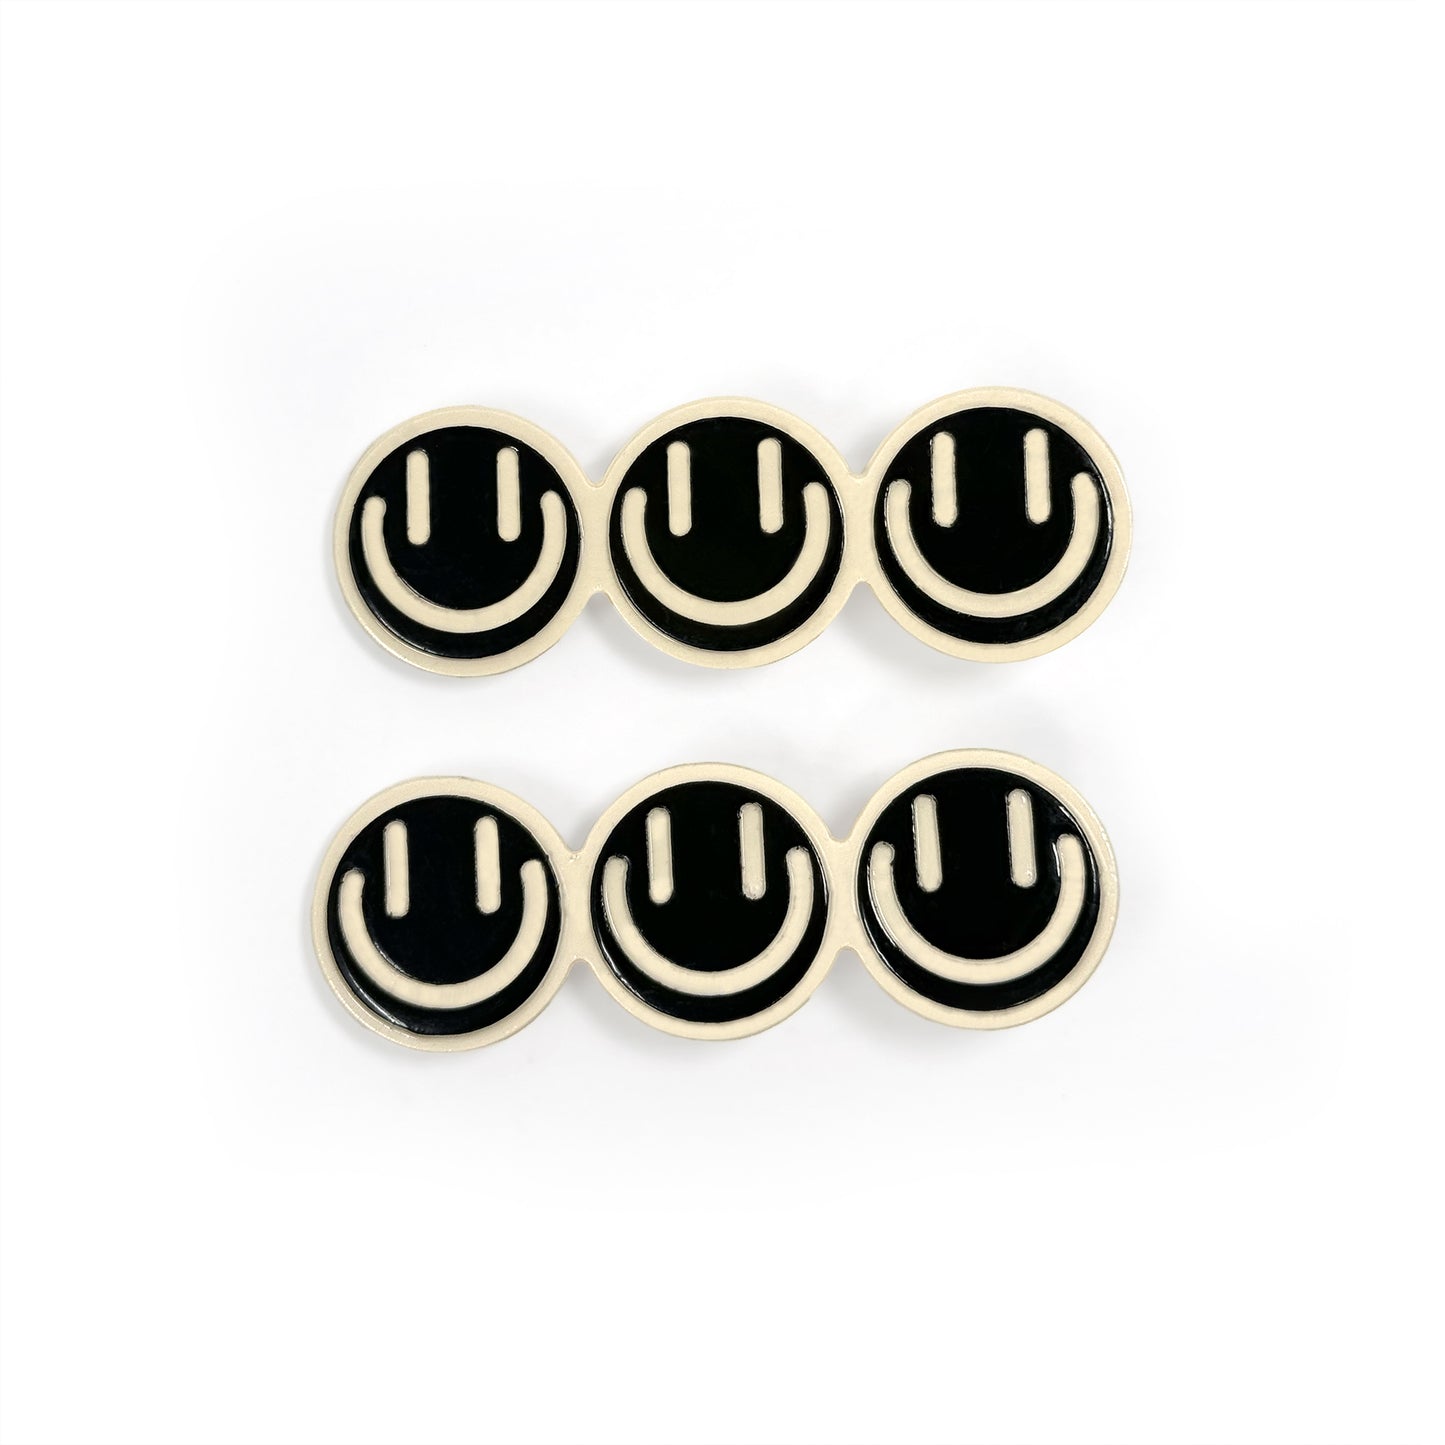 TRIPLE SMILEY FACE HAIR CLIPS (Set of 2)